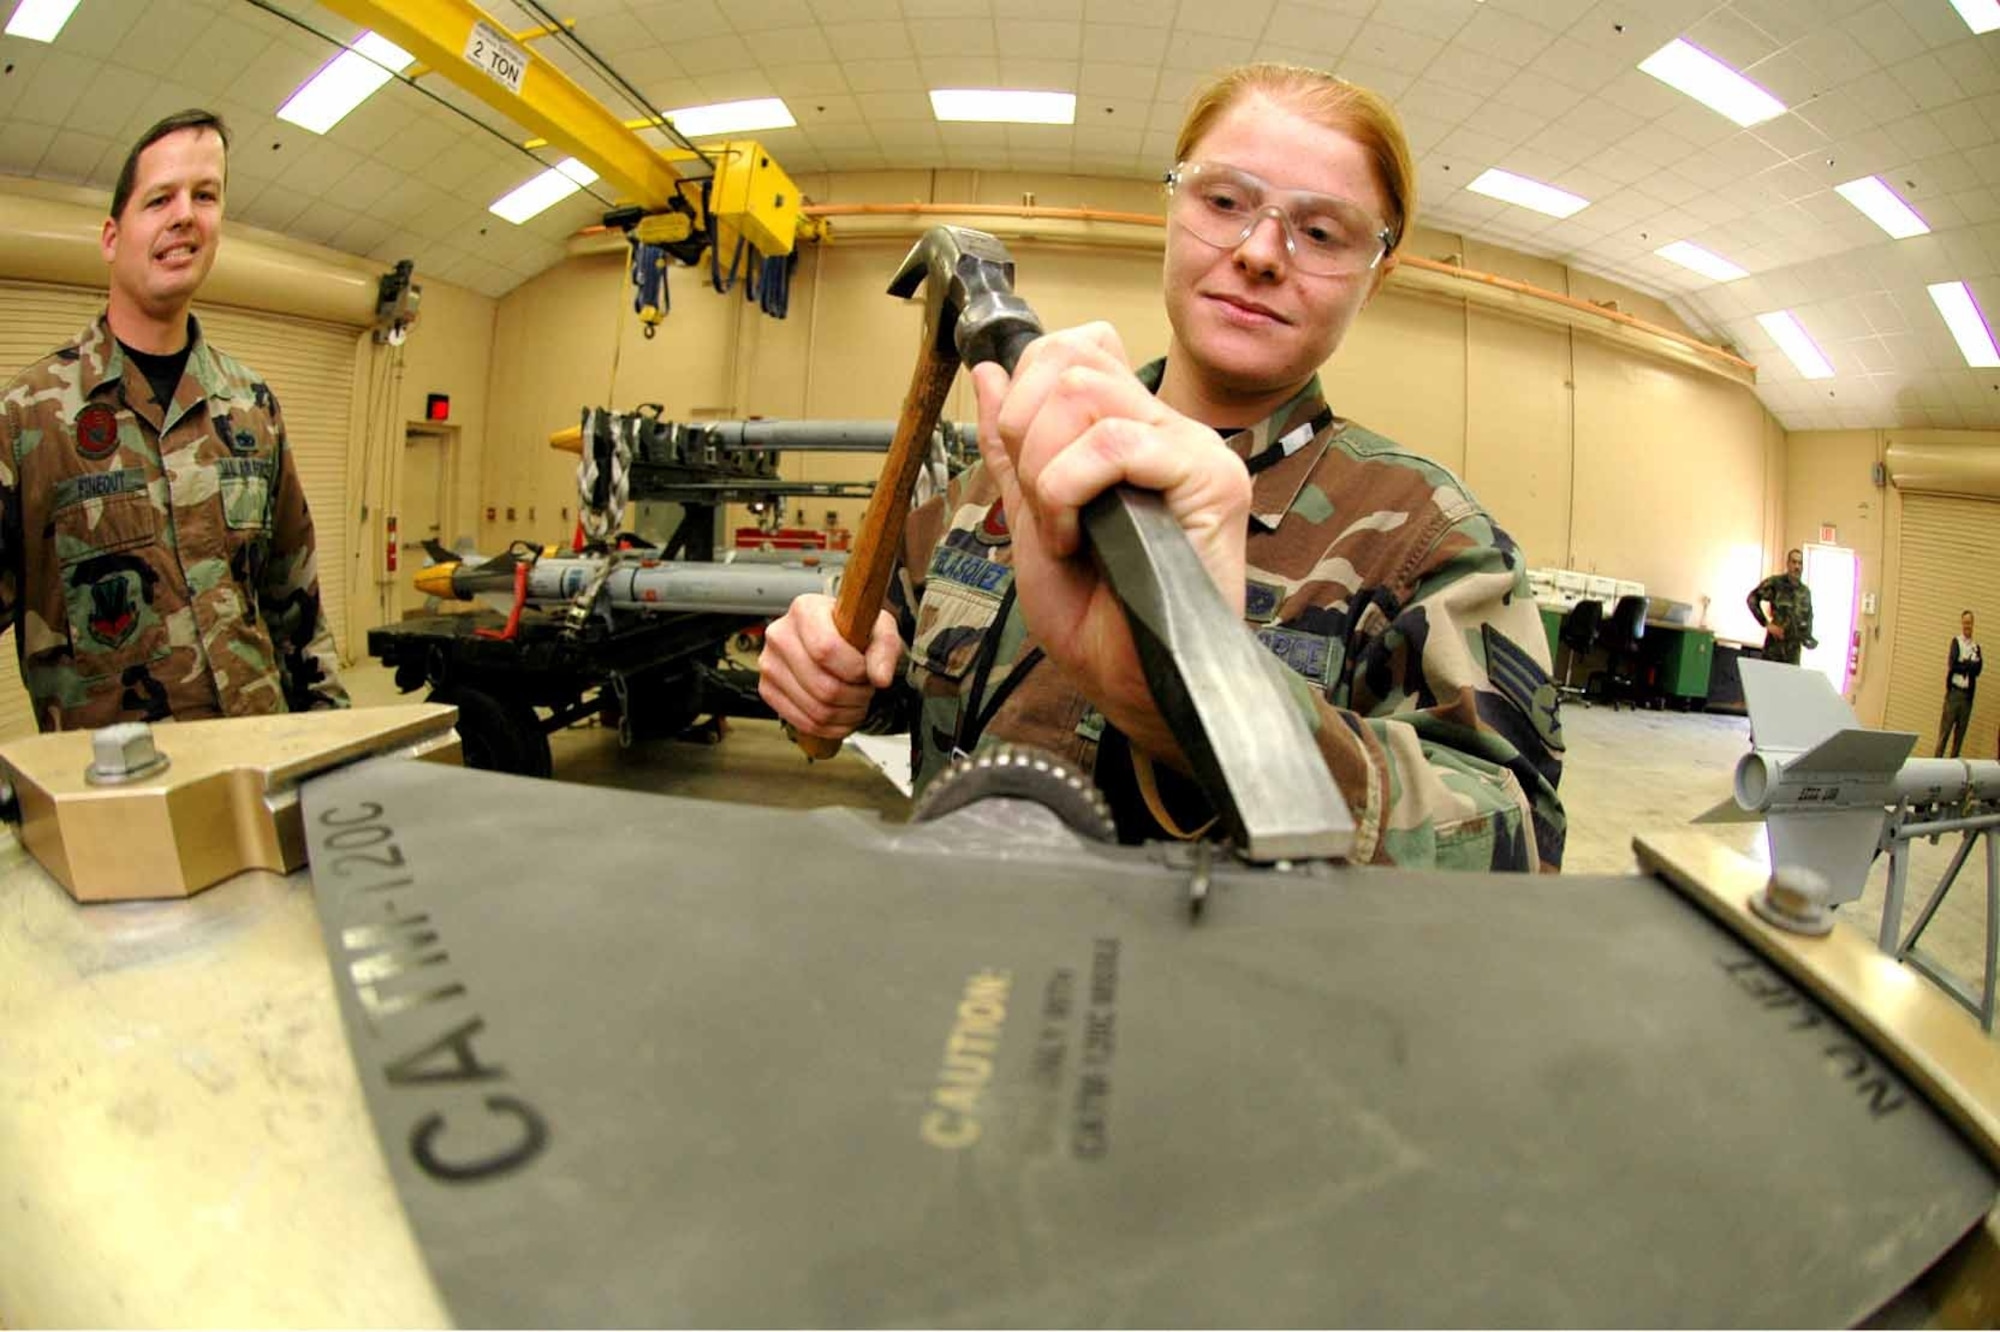 EGLIN AIR FORCE BASE, Fla. (AFMCNS) -Senior Airman Theresa Velasquez, 33rd Maintenance Squadron precision guided munitions crew member, removes a rivet on an AIM-120 fin using a fixture created by the Munitions Materiel Handling Equipment Focal Point here. Before the crew had this piece of equipment it could not change the locks and had to send the fin off for a depot-level repair. This process would have taken at least a month and now it is done in as little as one minute inside the shop.  (Air Force photo by Senior Airman Mike Meares)
